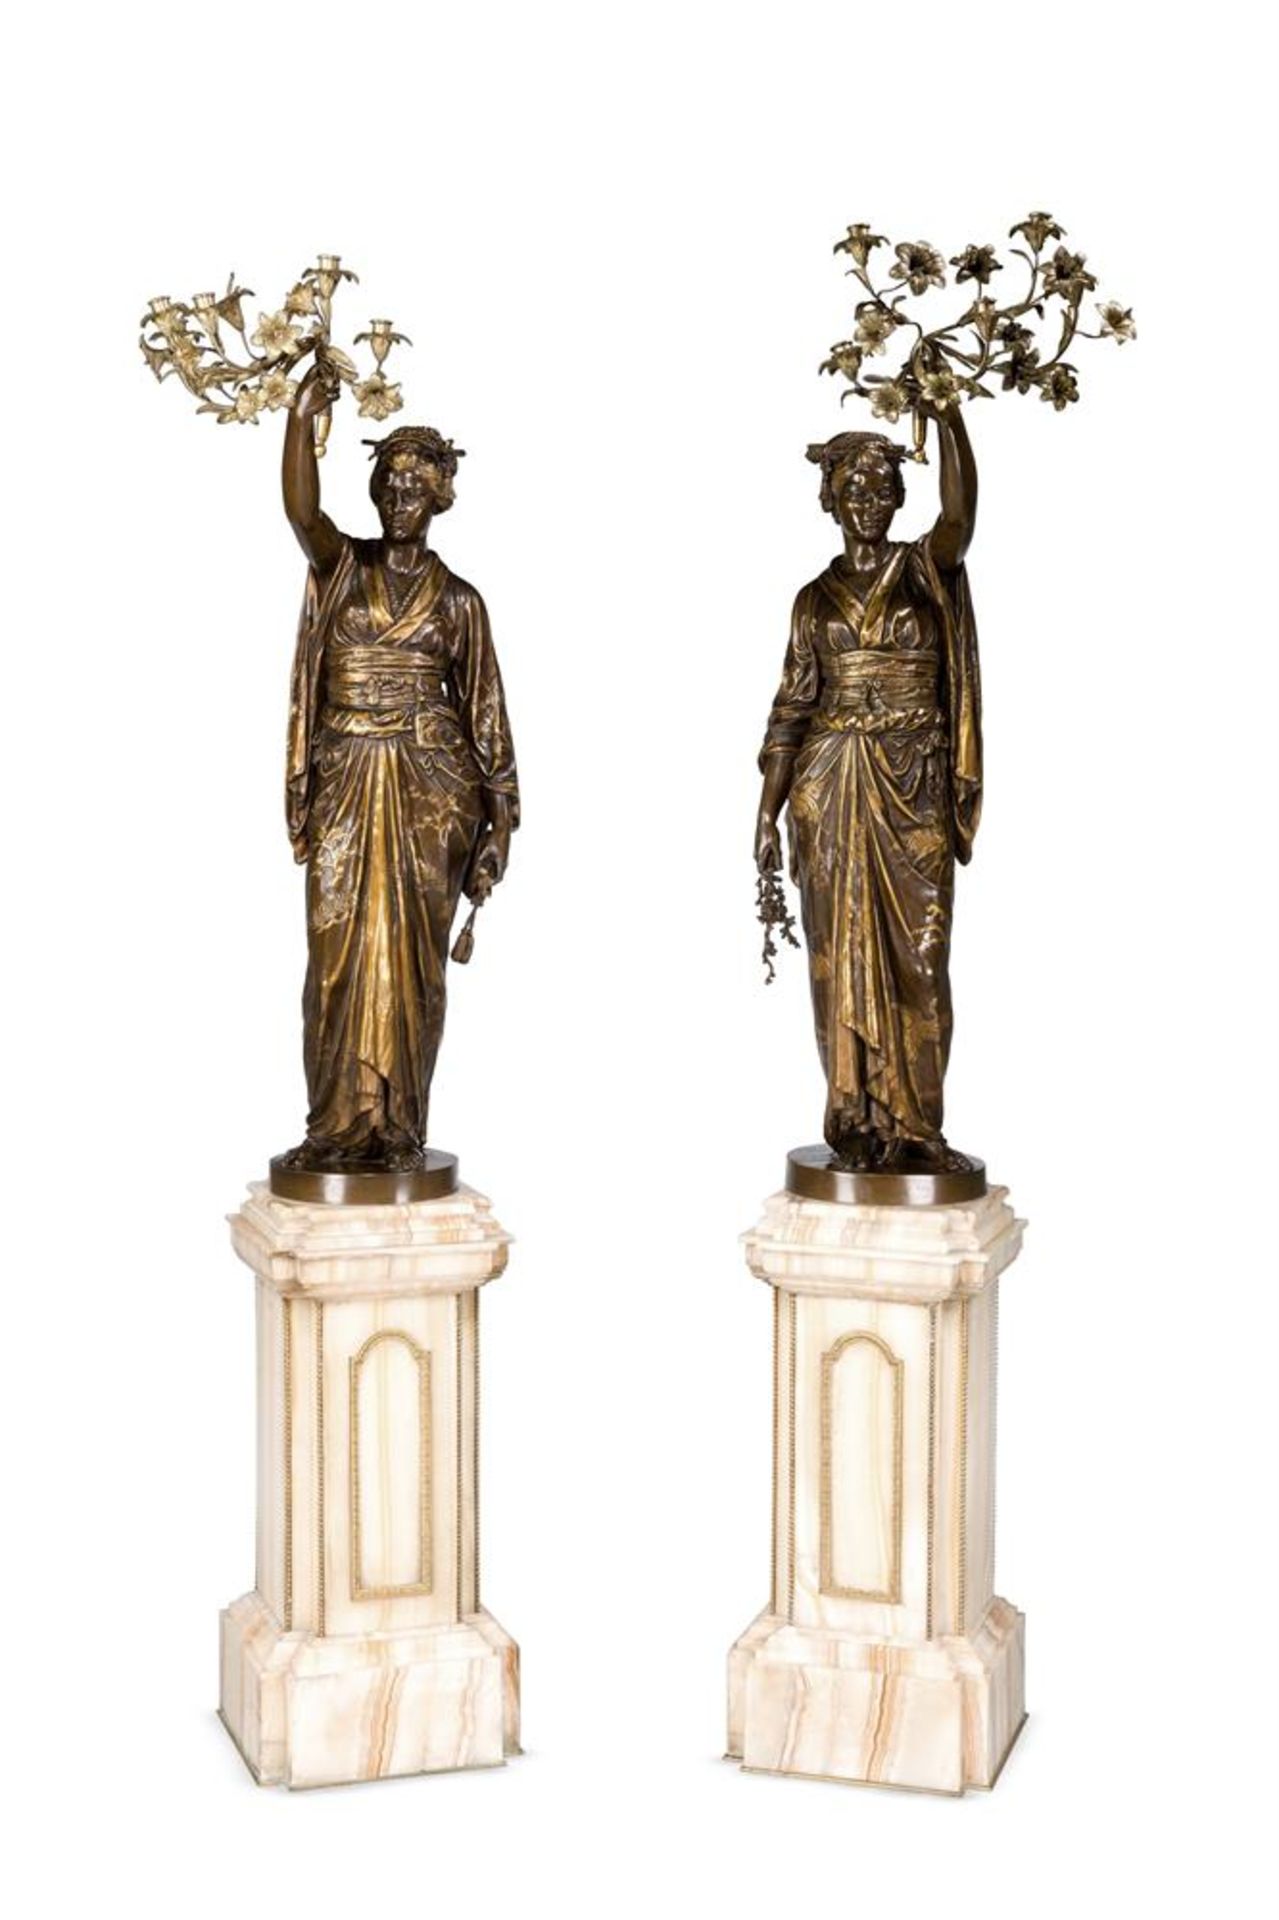 A RARE PAIR OF PARCEL GILT AND BRONZE FIGURAL TORCHERES, BY BARBEDIENNE AND GUILLEMIN, CIRCA 1870